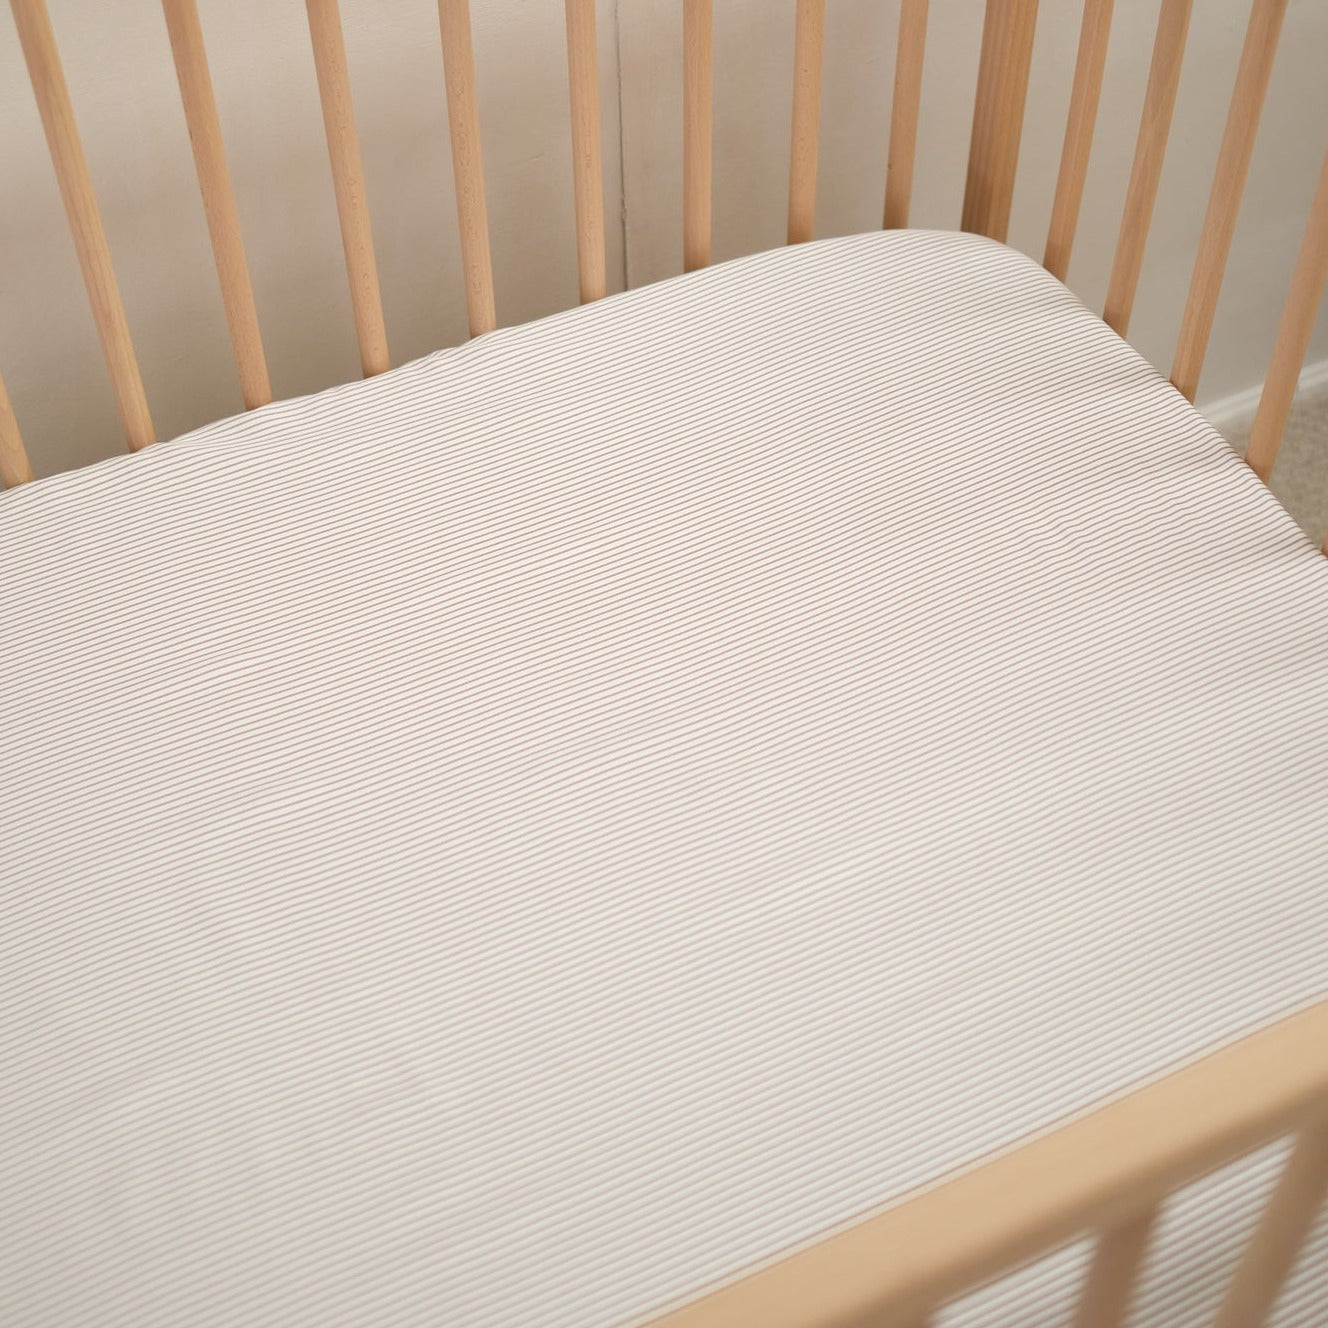 Bamboo Cot Fitted Sheet - Mocha Stripe